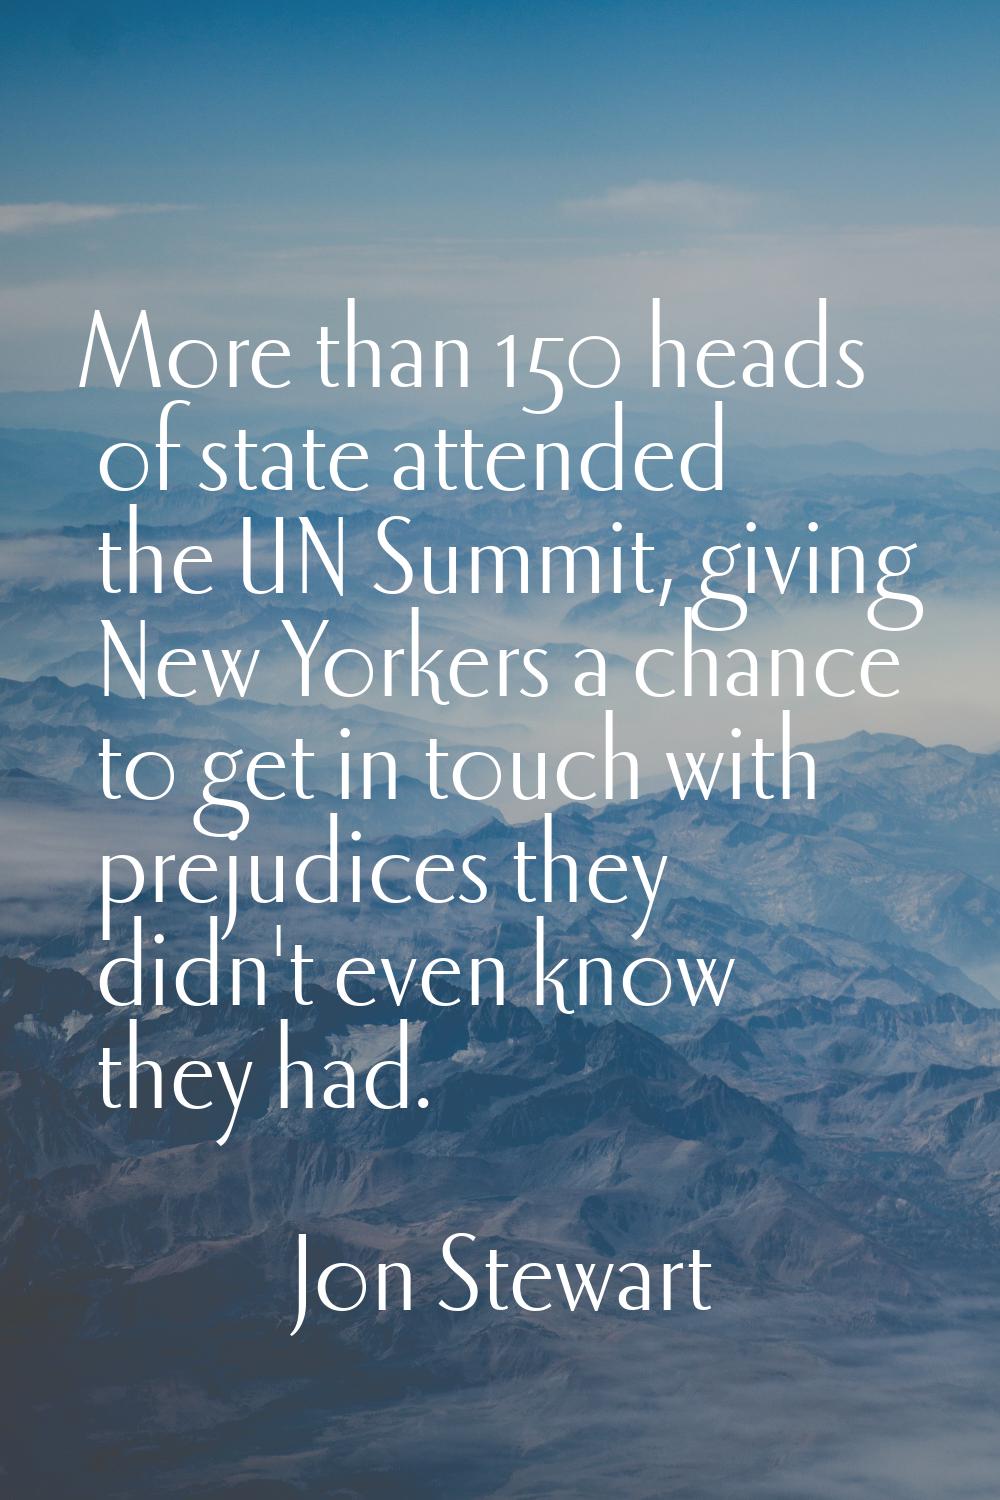 More than 150 heads of state attended the UN Summit, giving New Yorkers a chance to get in touch wi